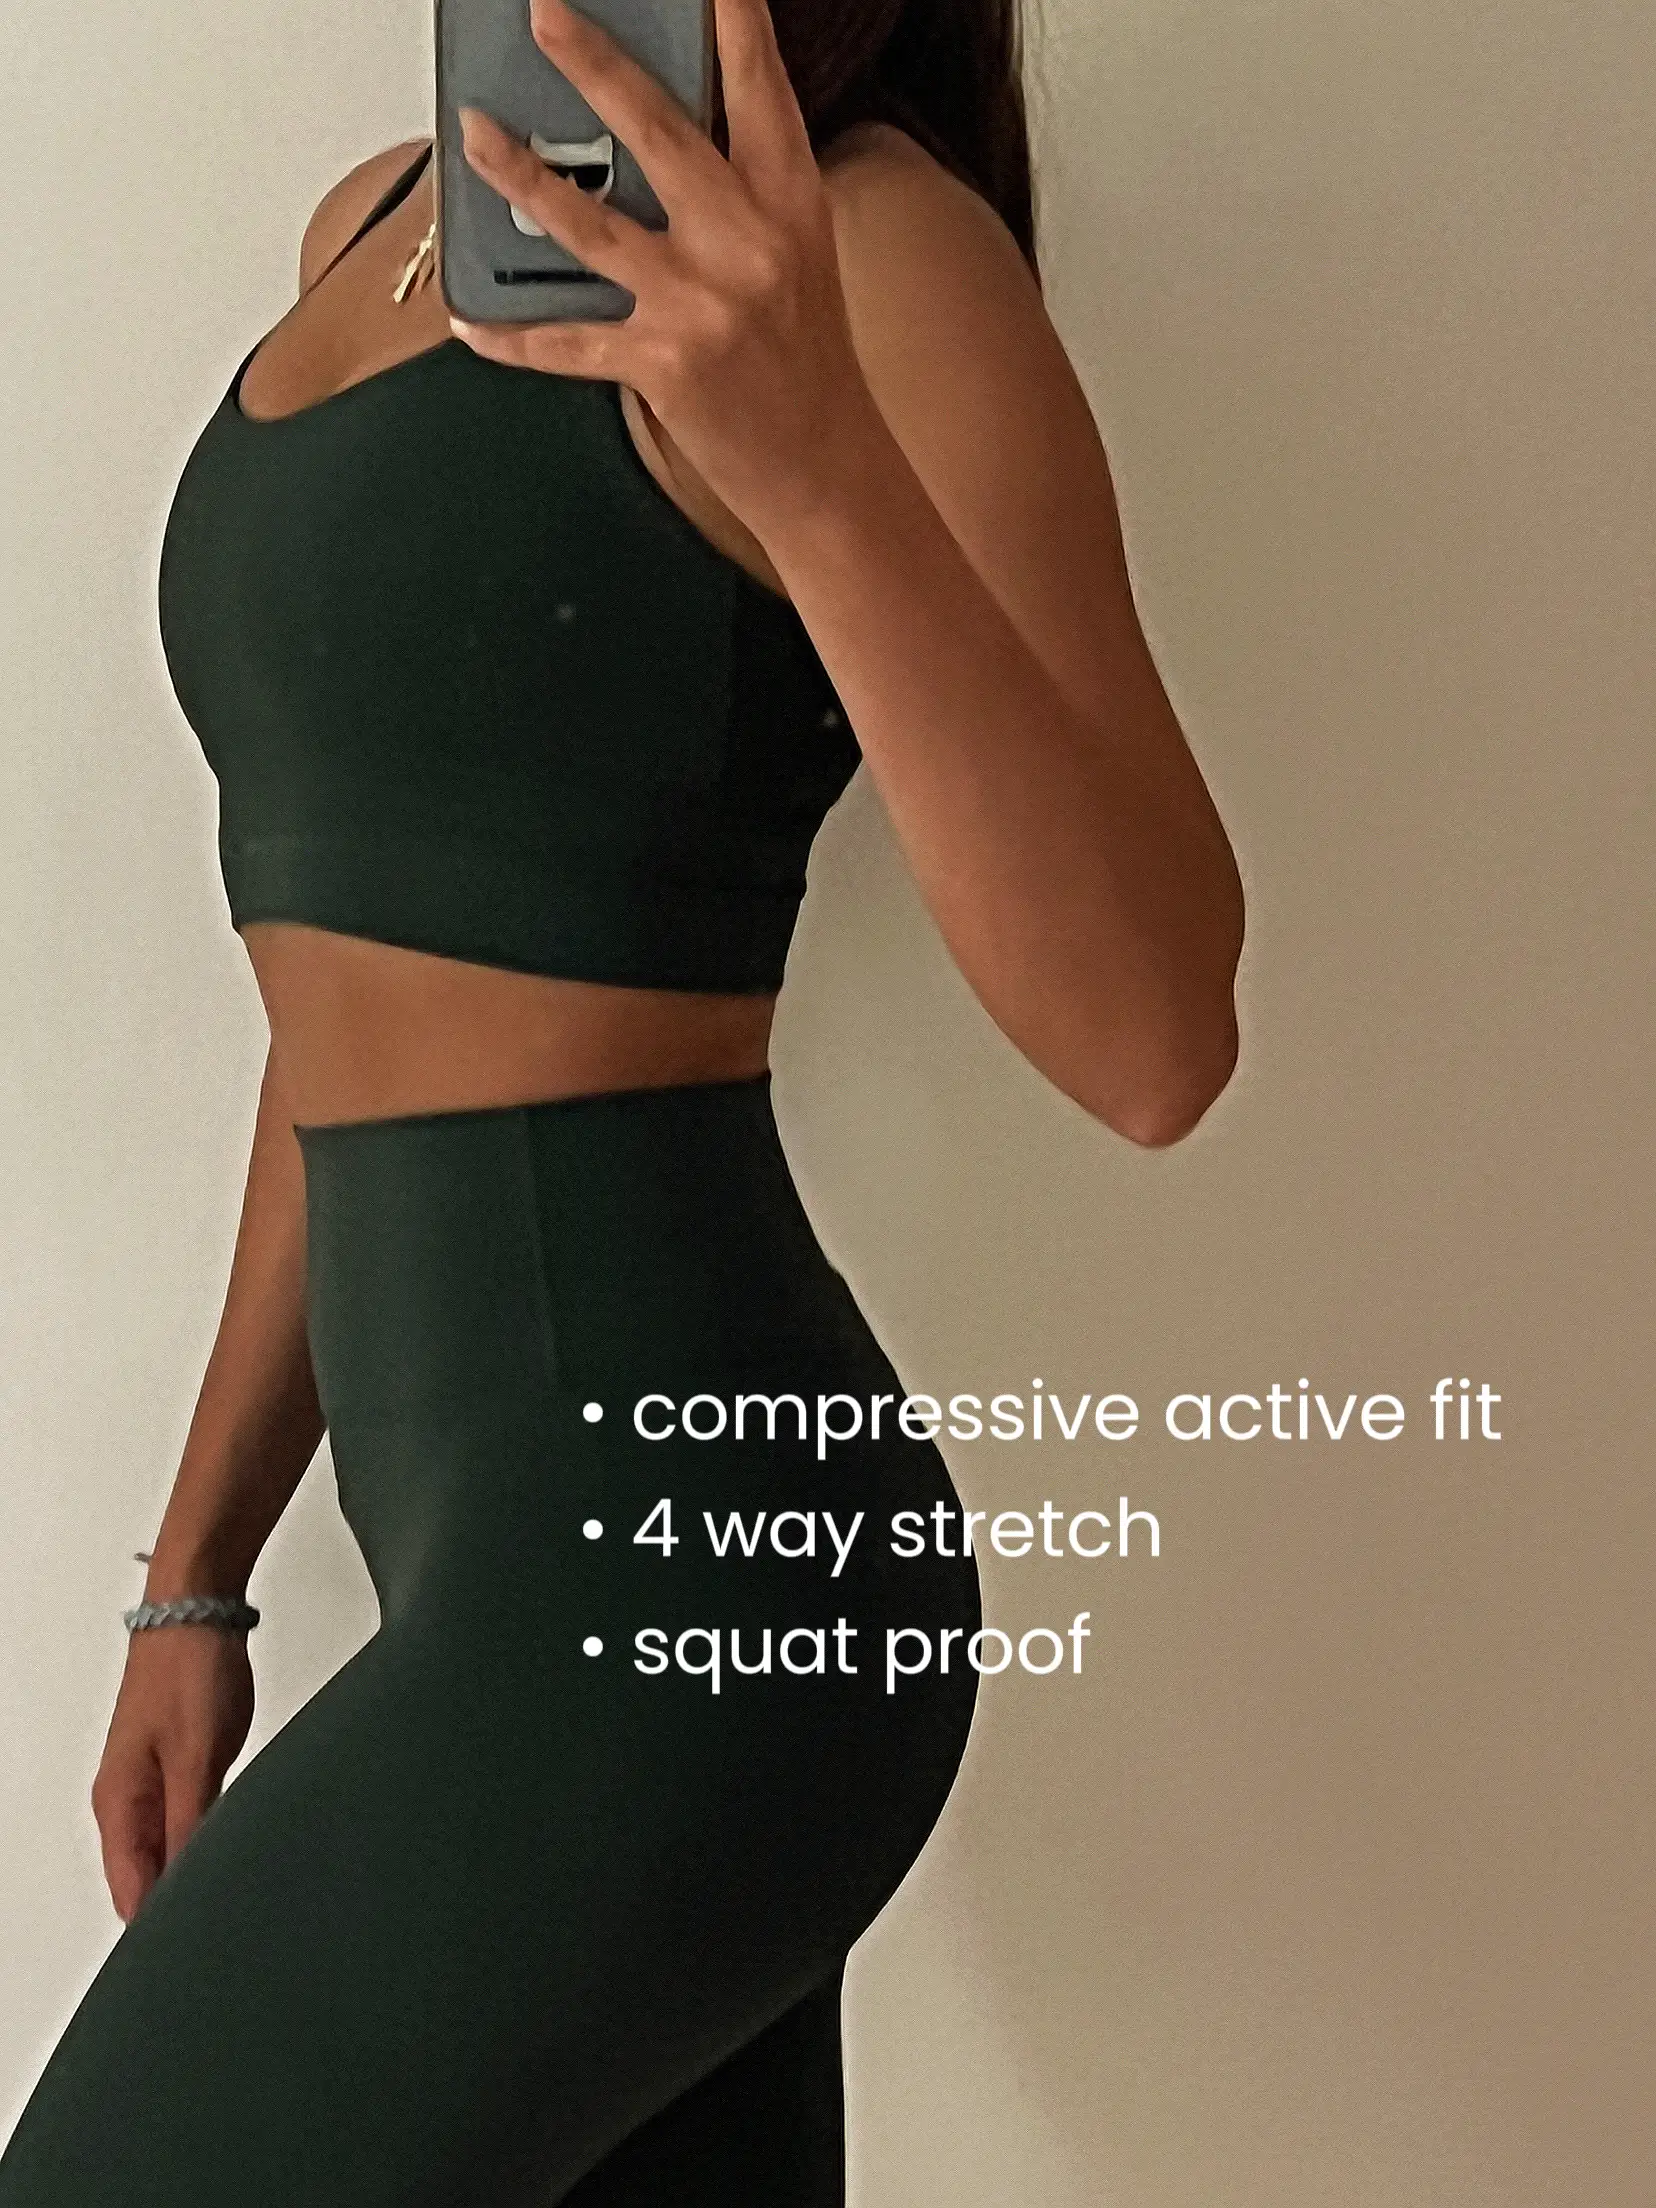 My First Fabletics Order  Honest Review - Live Love Sophia